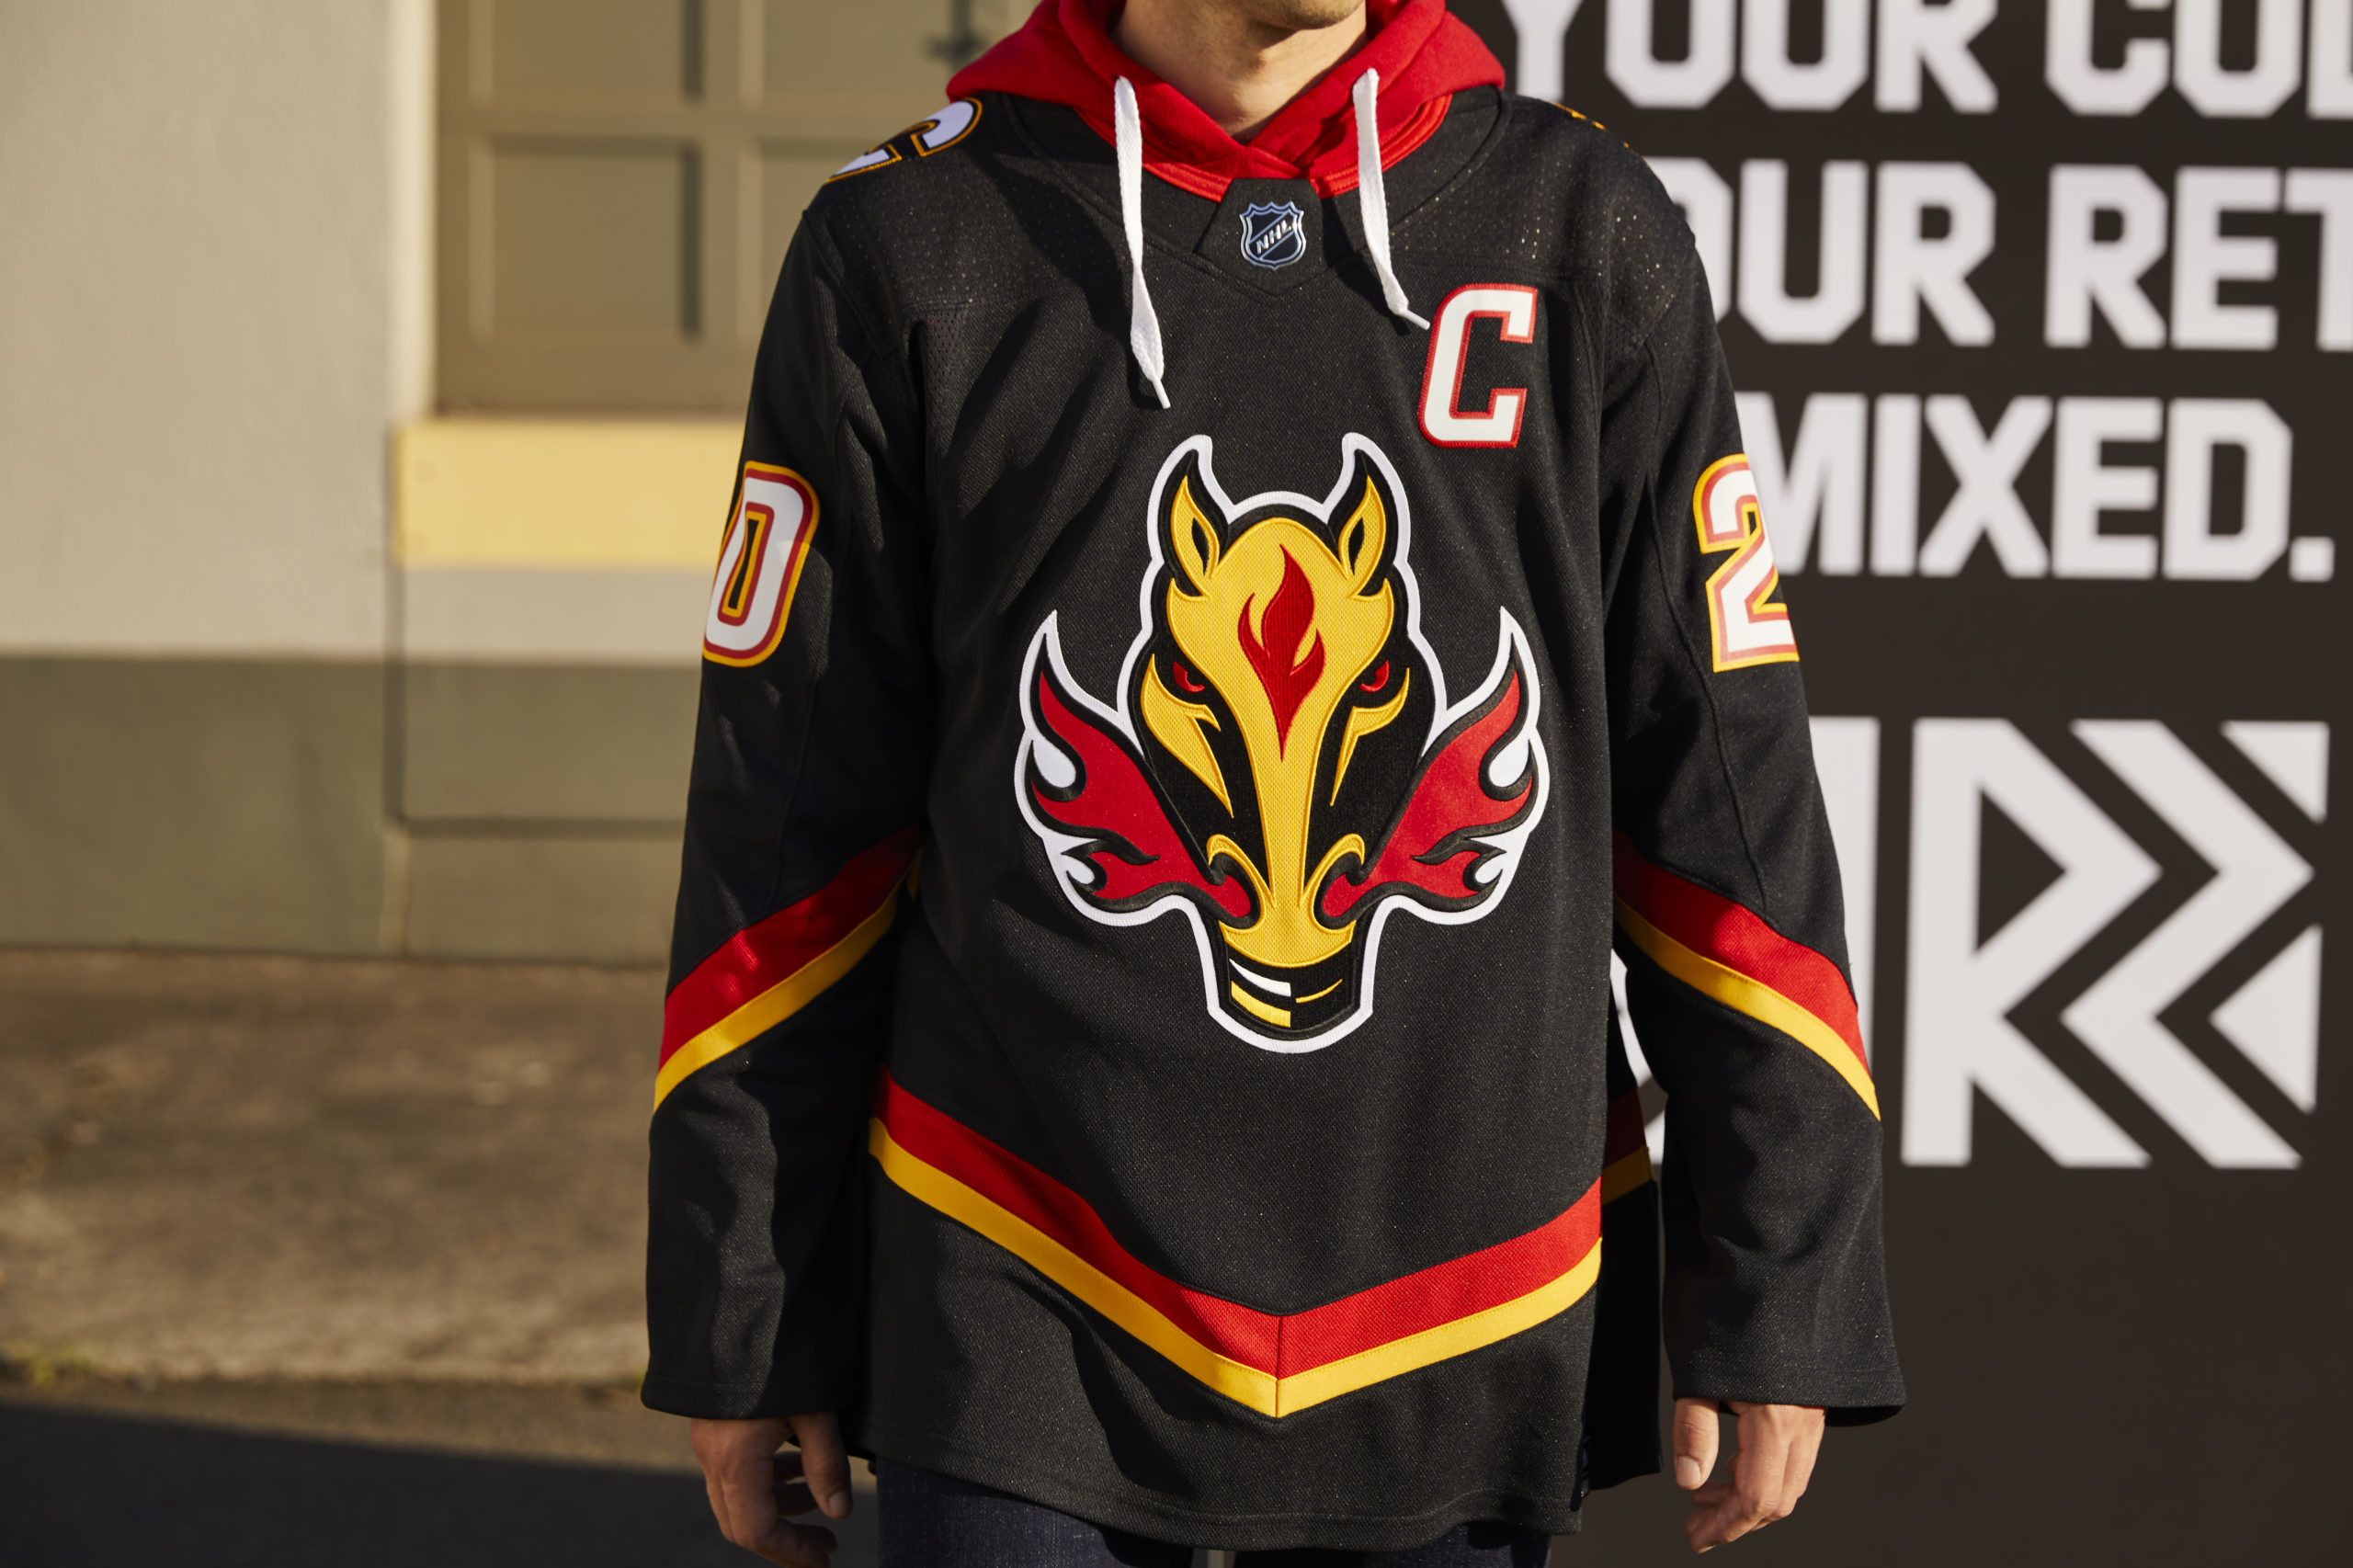 Going 'full retro': Calgary Flames officially unveil new jersey - Calgary